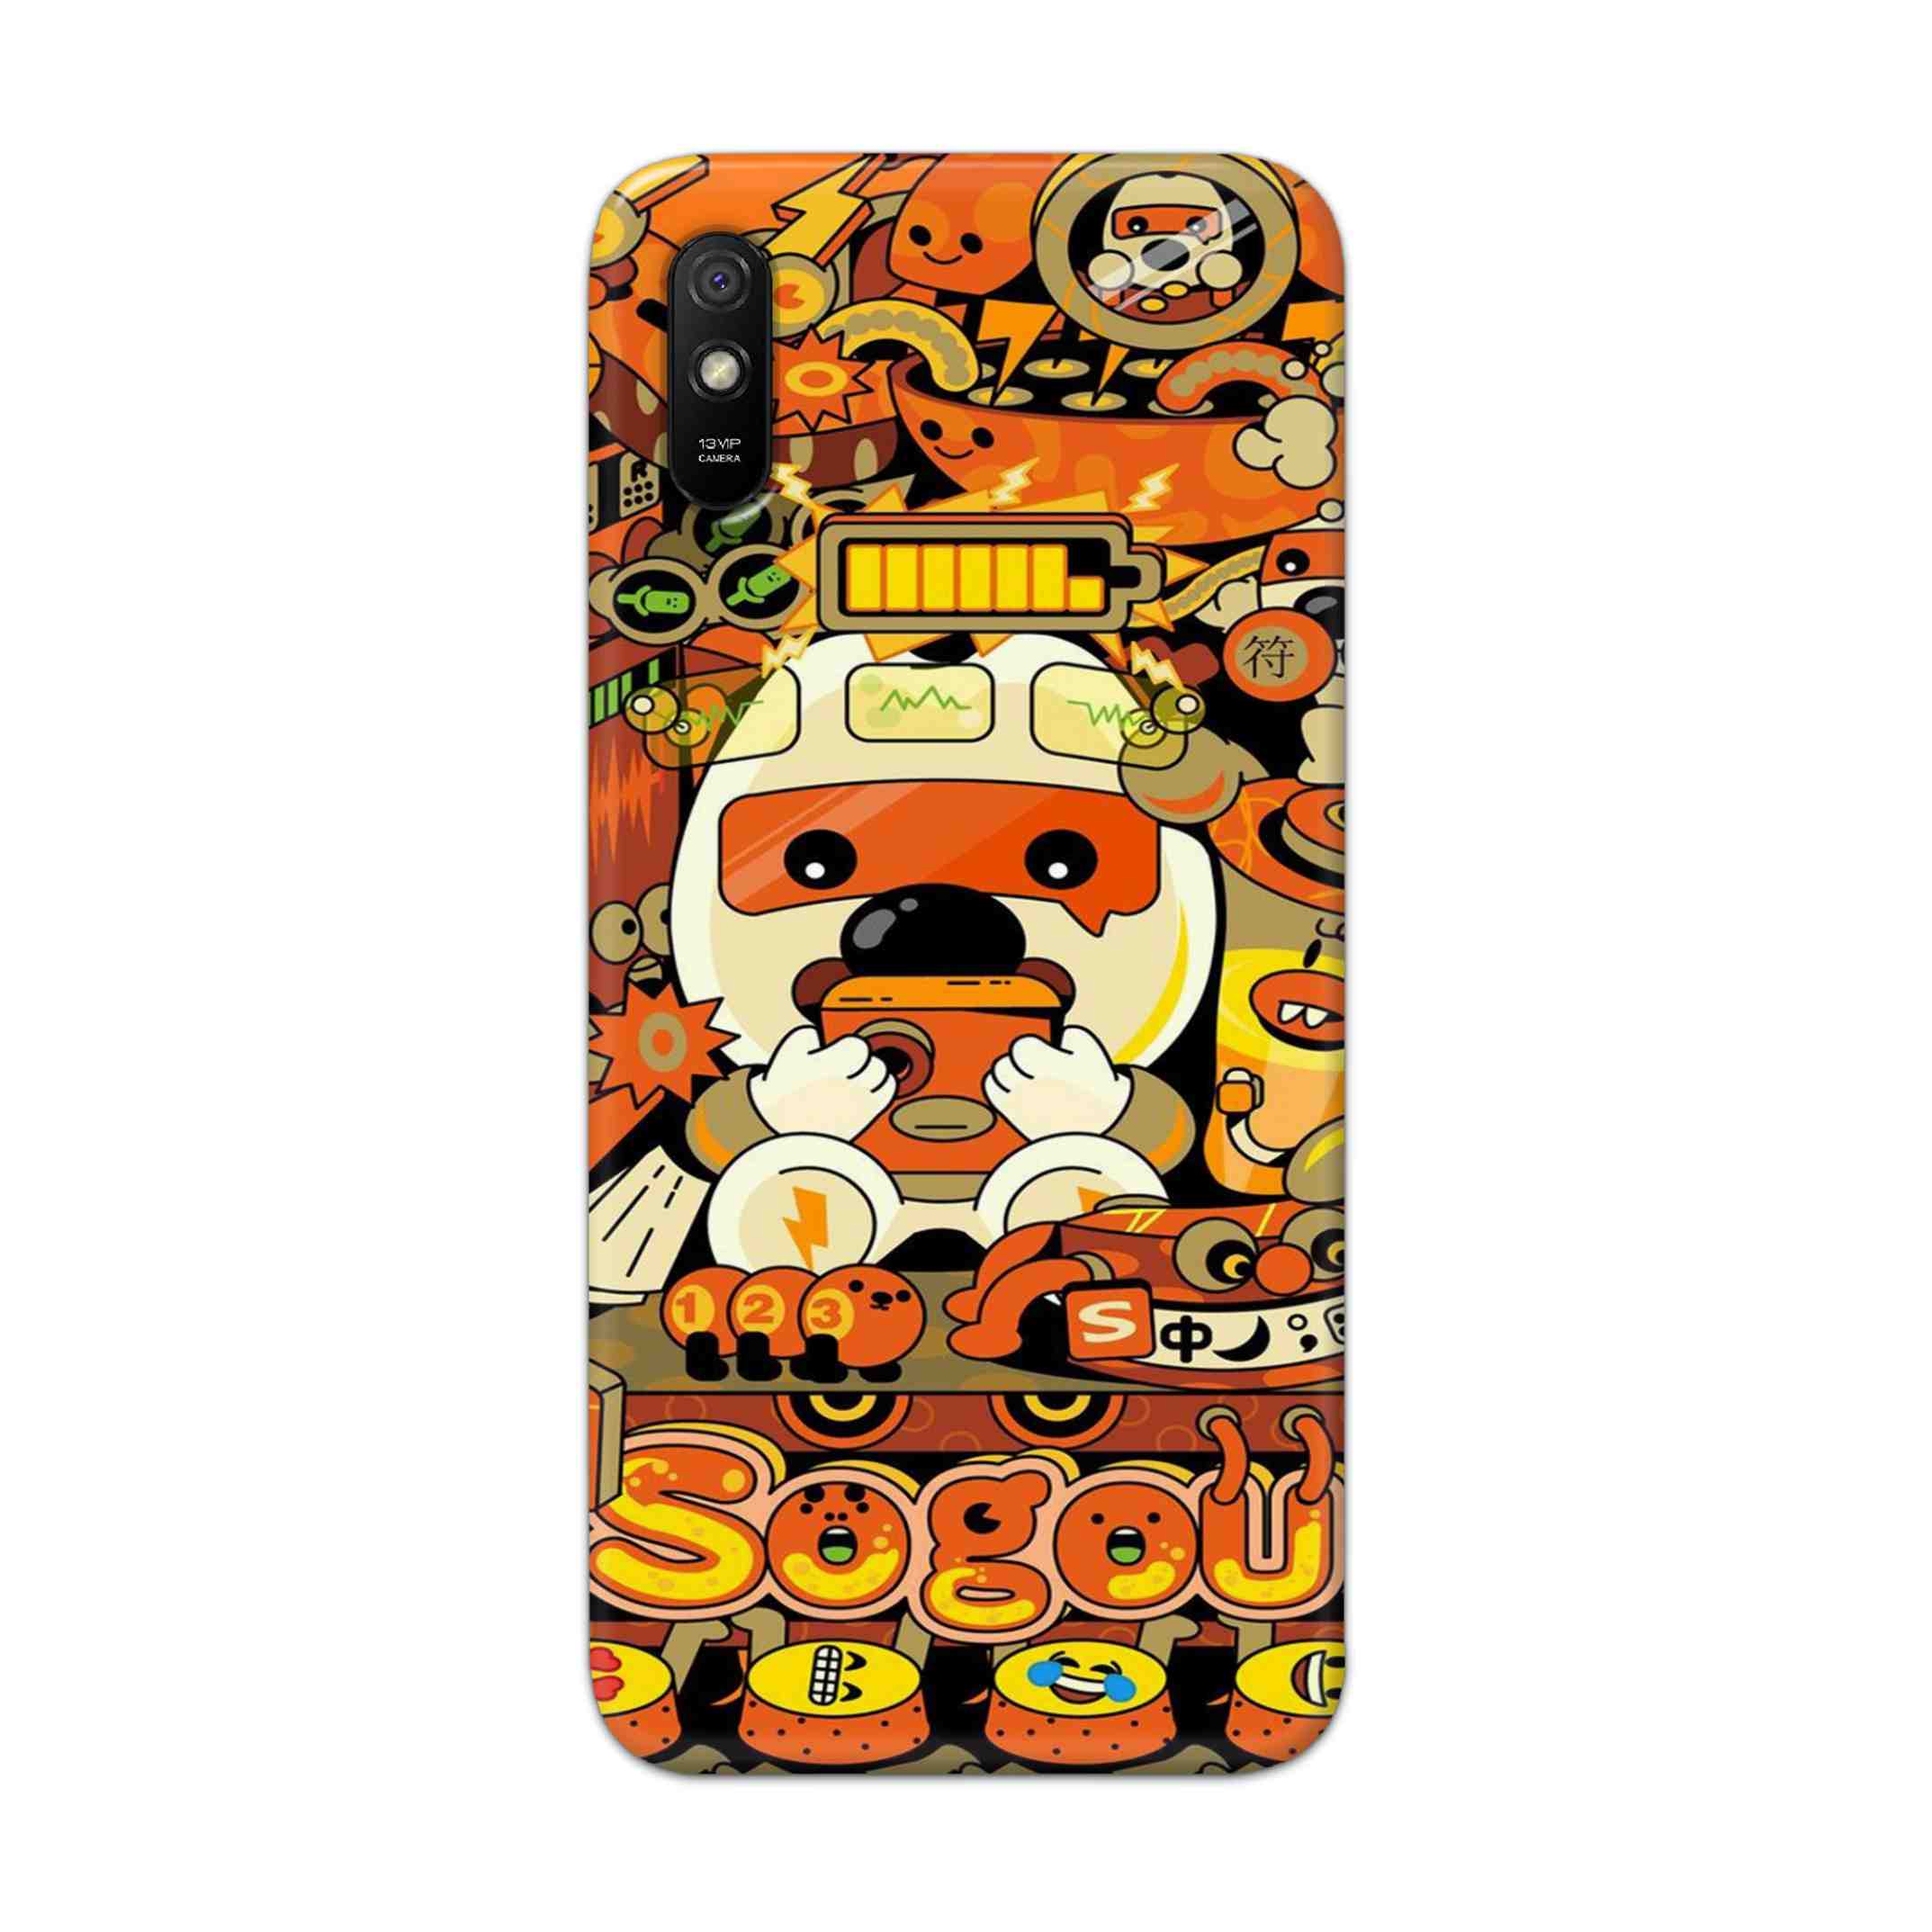 Buy Sogou Hard Back Mobile Phone Case Cover For Redmi 9A Online